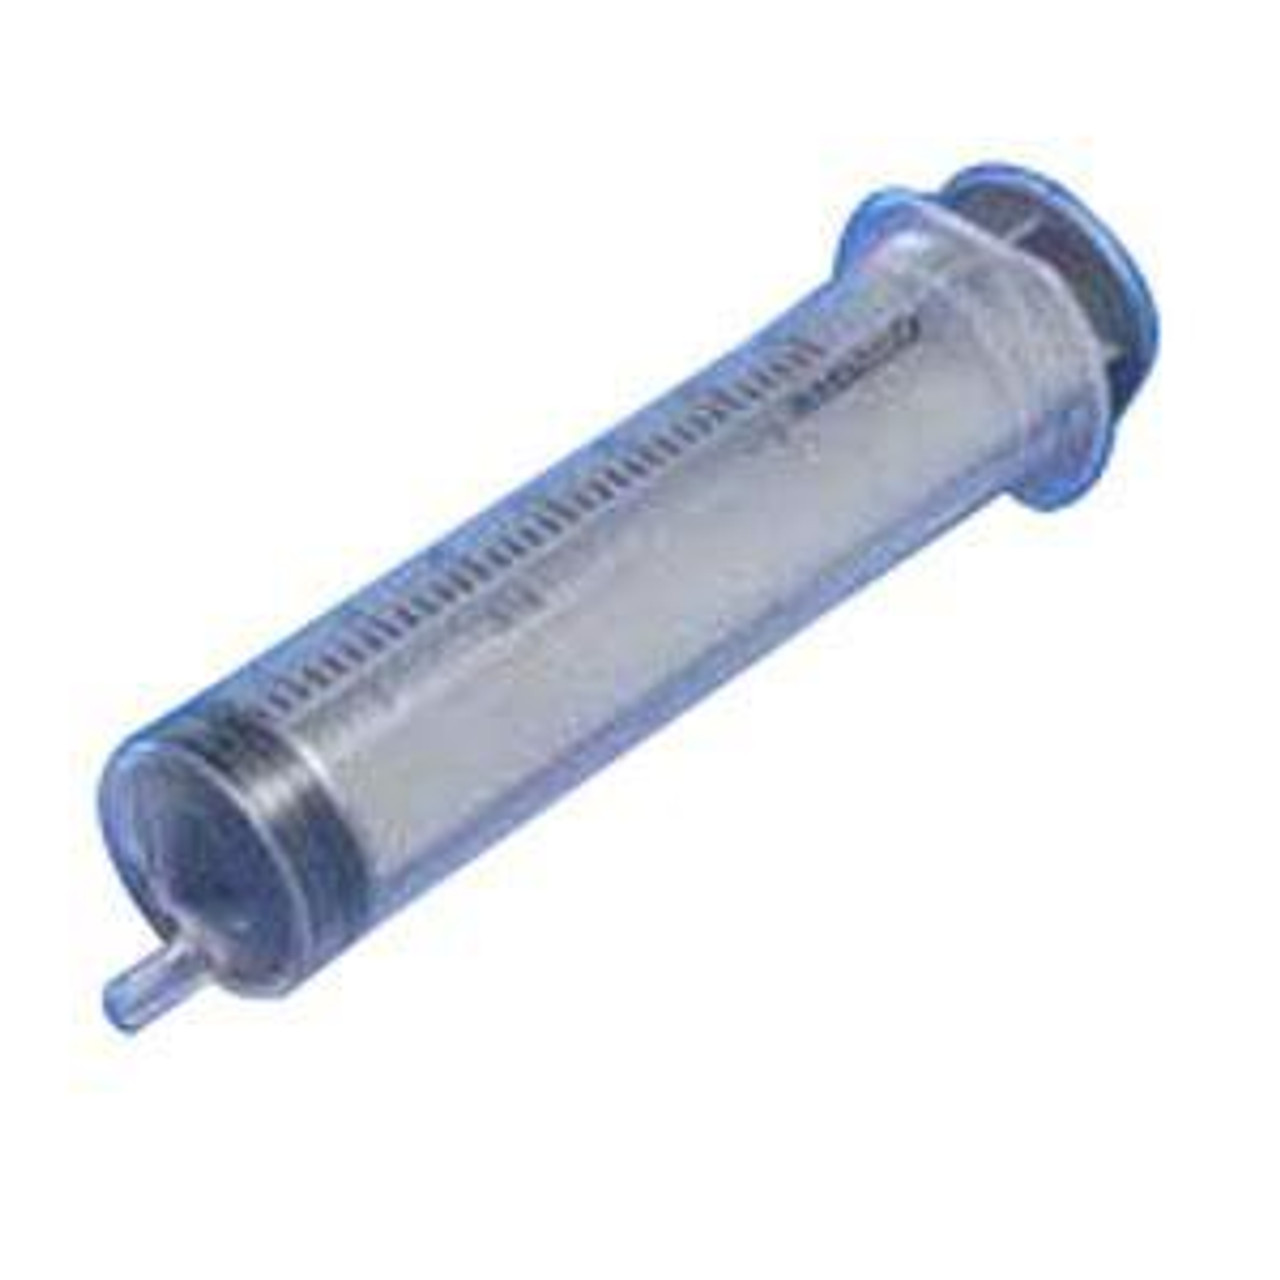 Kendall 8881535770 (CS6) BX/30 MONOJECT SYRINGE ONLY CATH TIP ST 35CC (Kendall 8881535770)